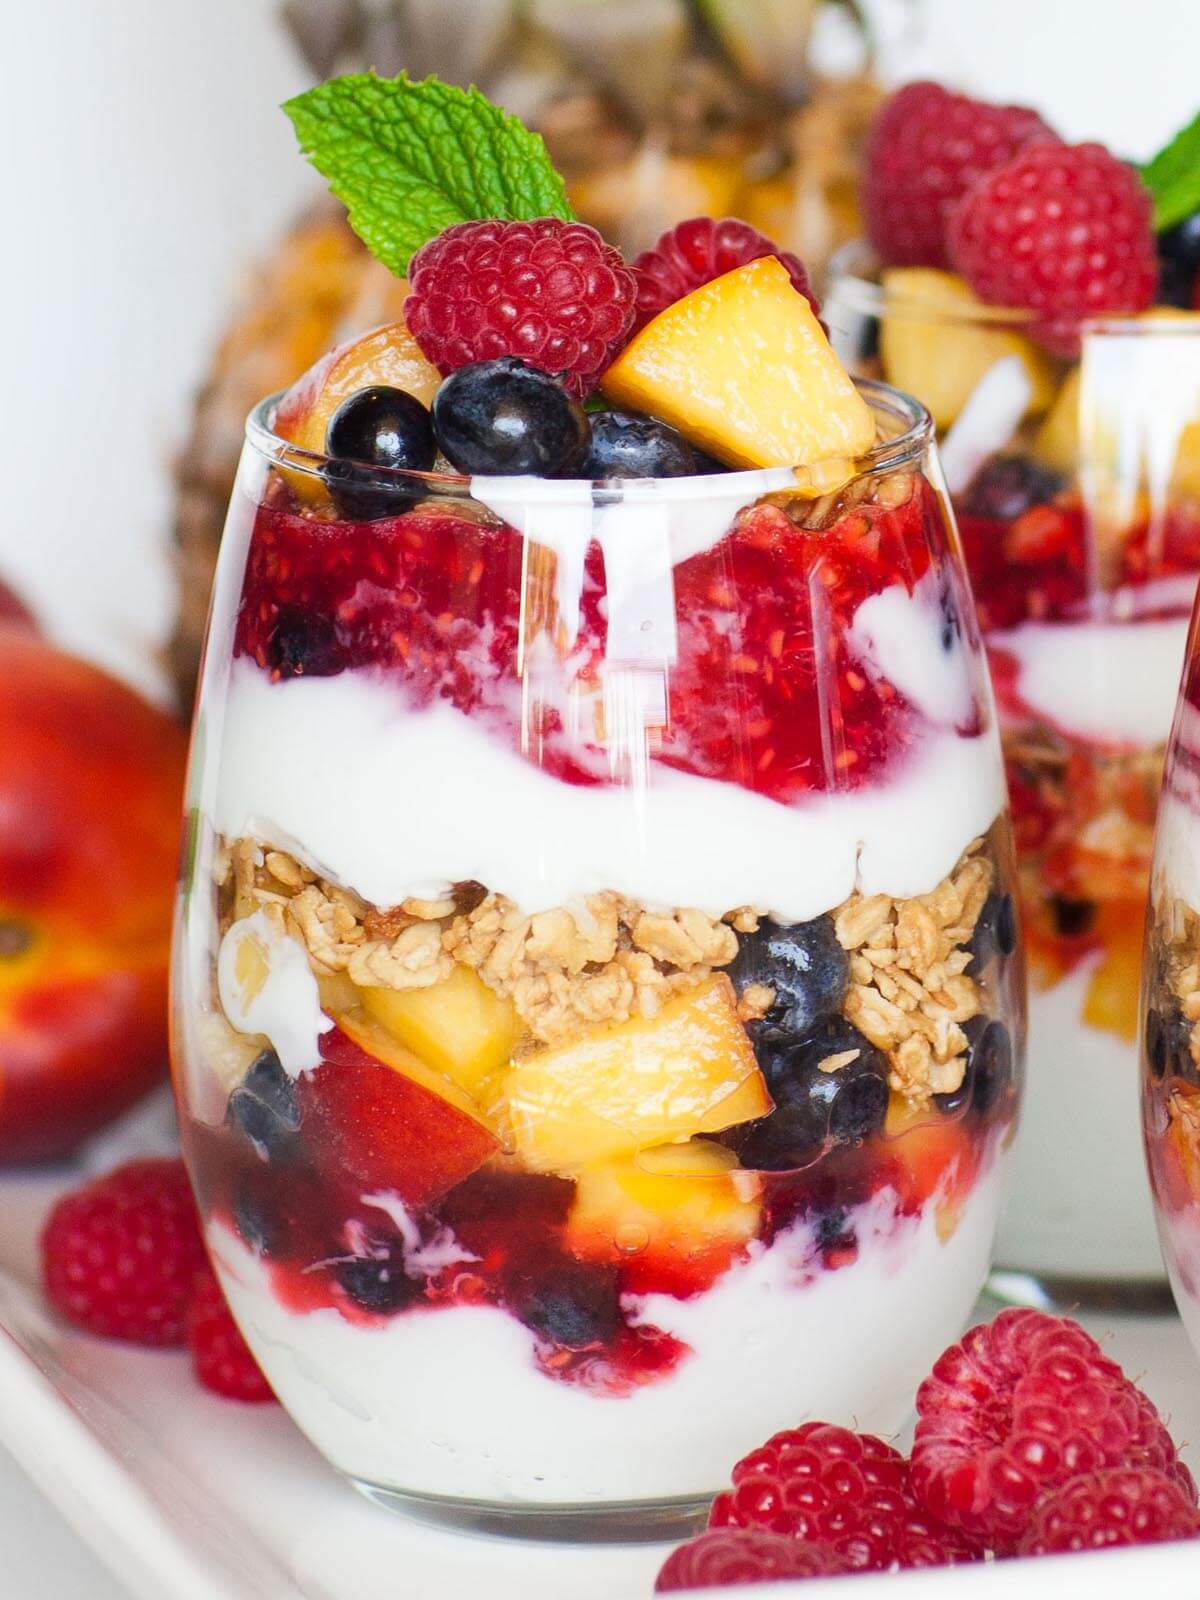 Vibrant fruit parfait served in a clear glass showcasing layers of yogurt, fruits, and granola